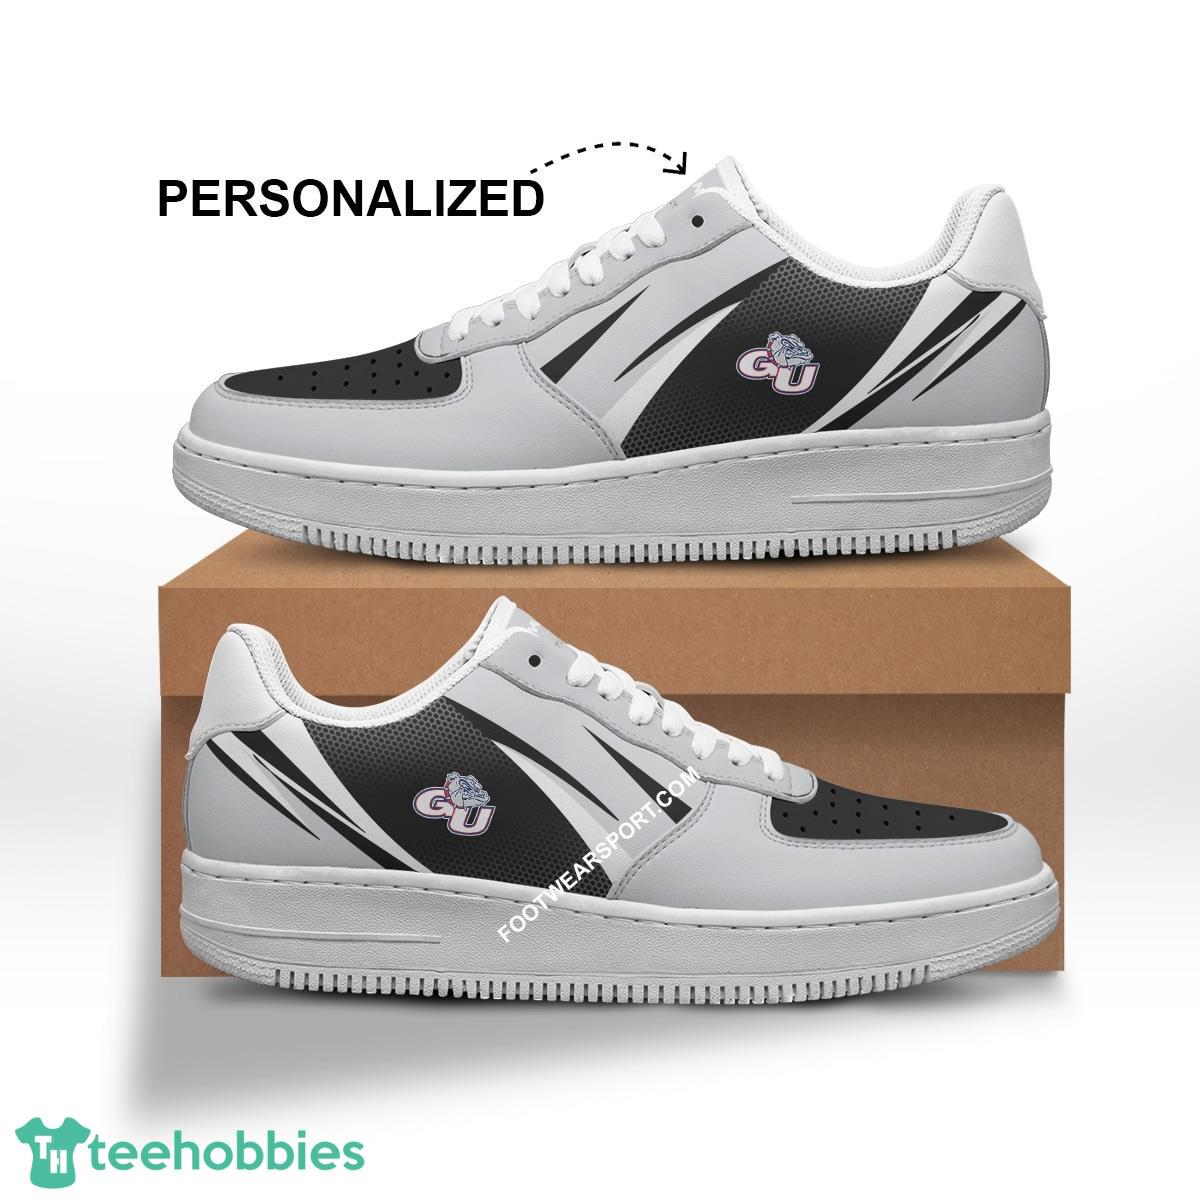 Custom Name Gonzaga Bulldogs Air Force 1 Shoes Trending Design For Men Women - NCAA2 Gonzaga Bulldogs Air Force 1 Shoes Personalized Style 1